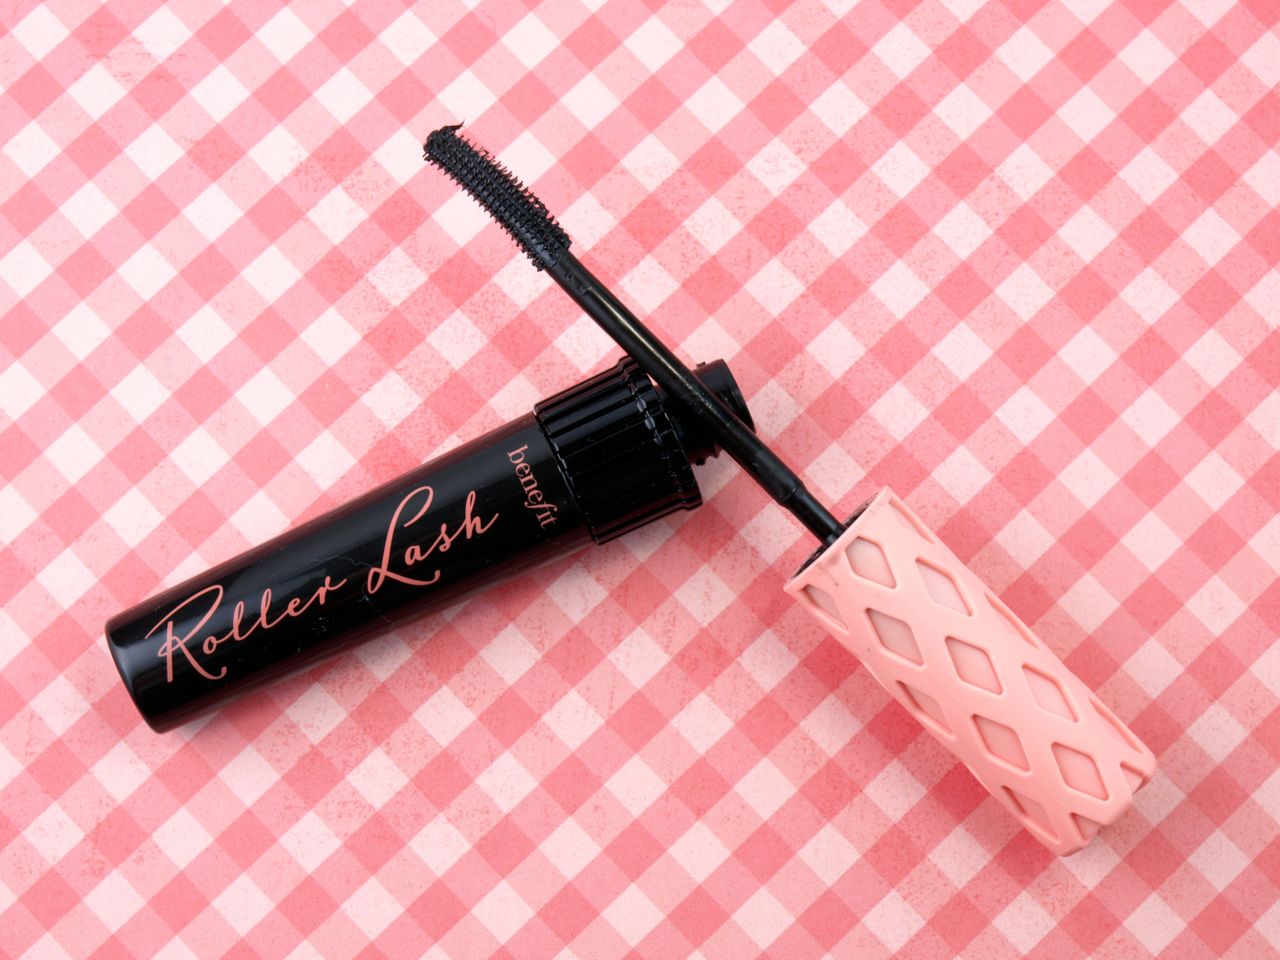 Benefit Roller Lash Mascara: Review and Swatches